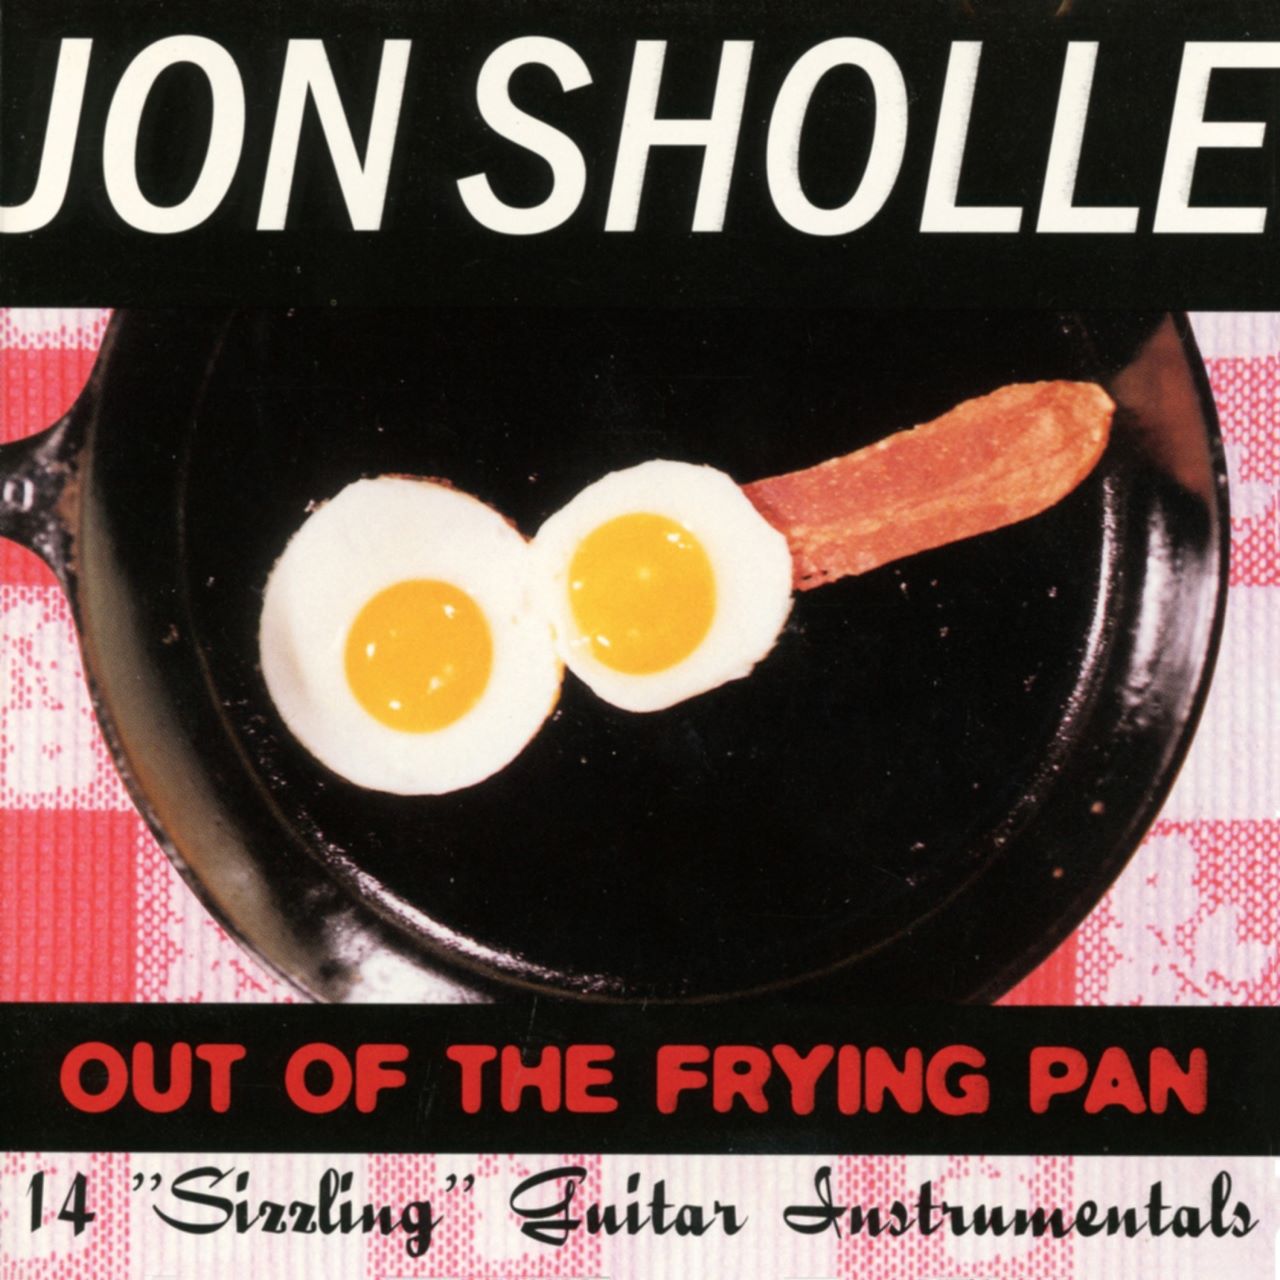 Jon Sholle - Out Of The Frying Pan cover album